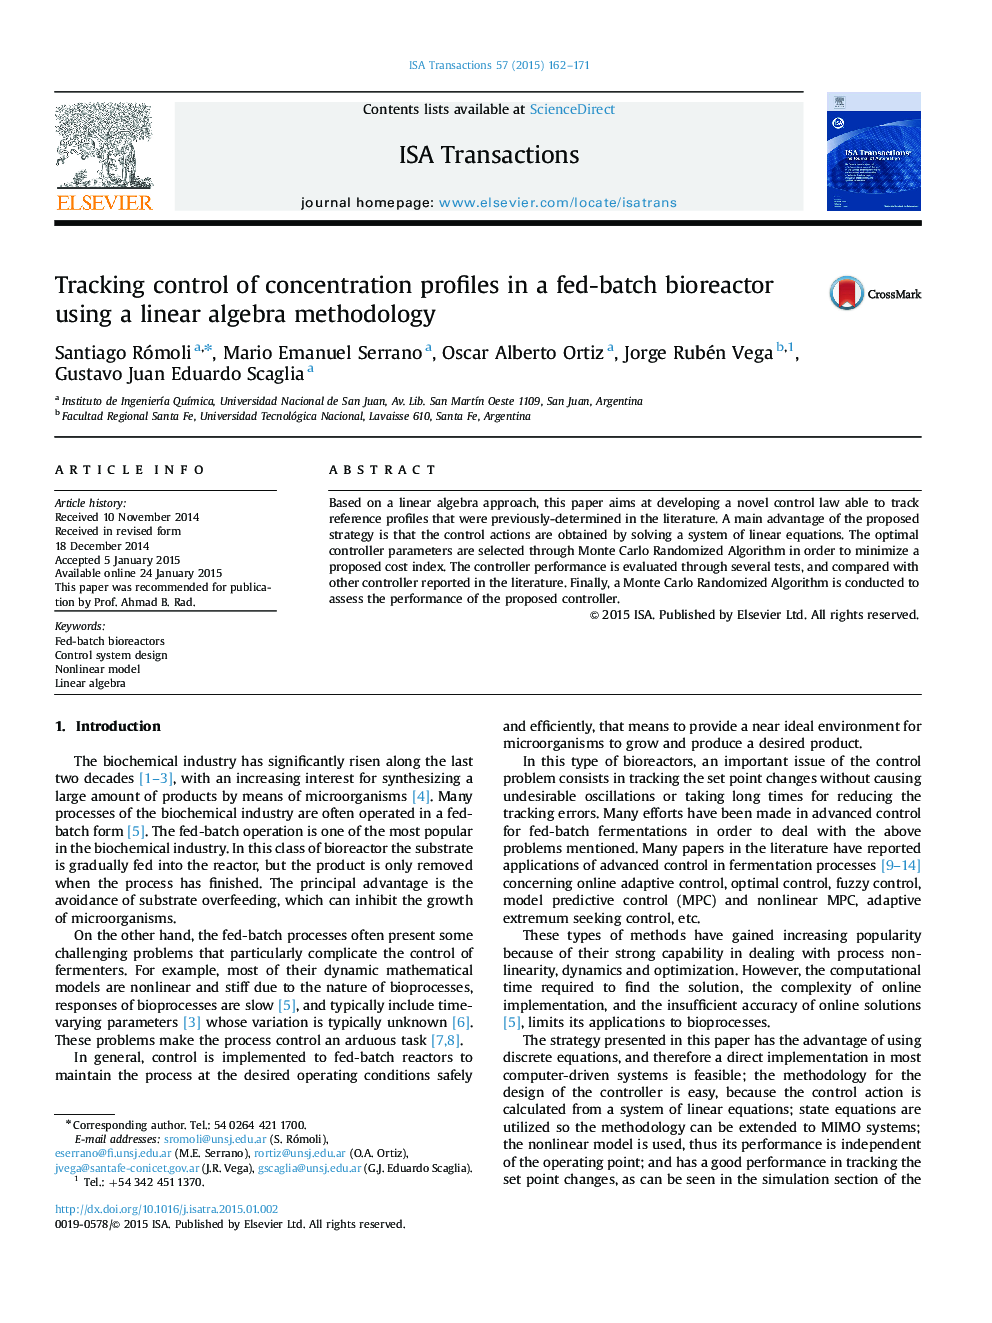 Research ArticleTracking control of concentration profiles in a fed-batch bioreactor using a linear algebra methodology